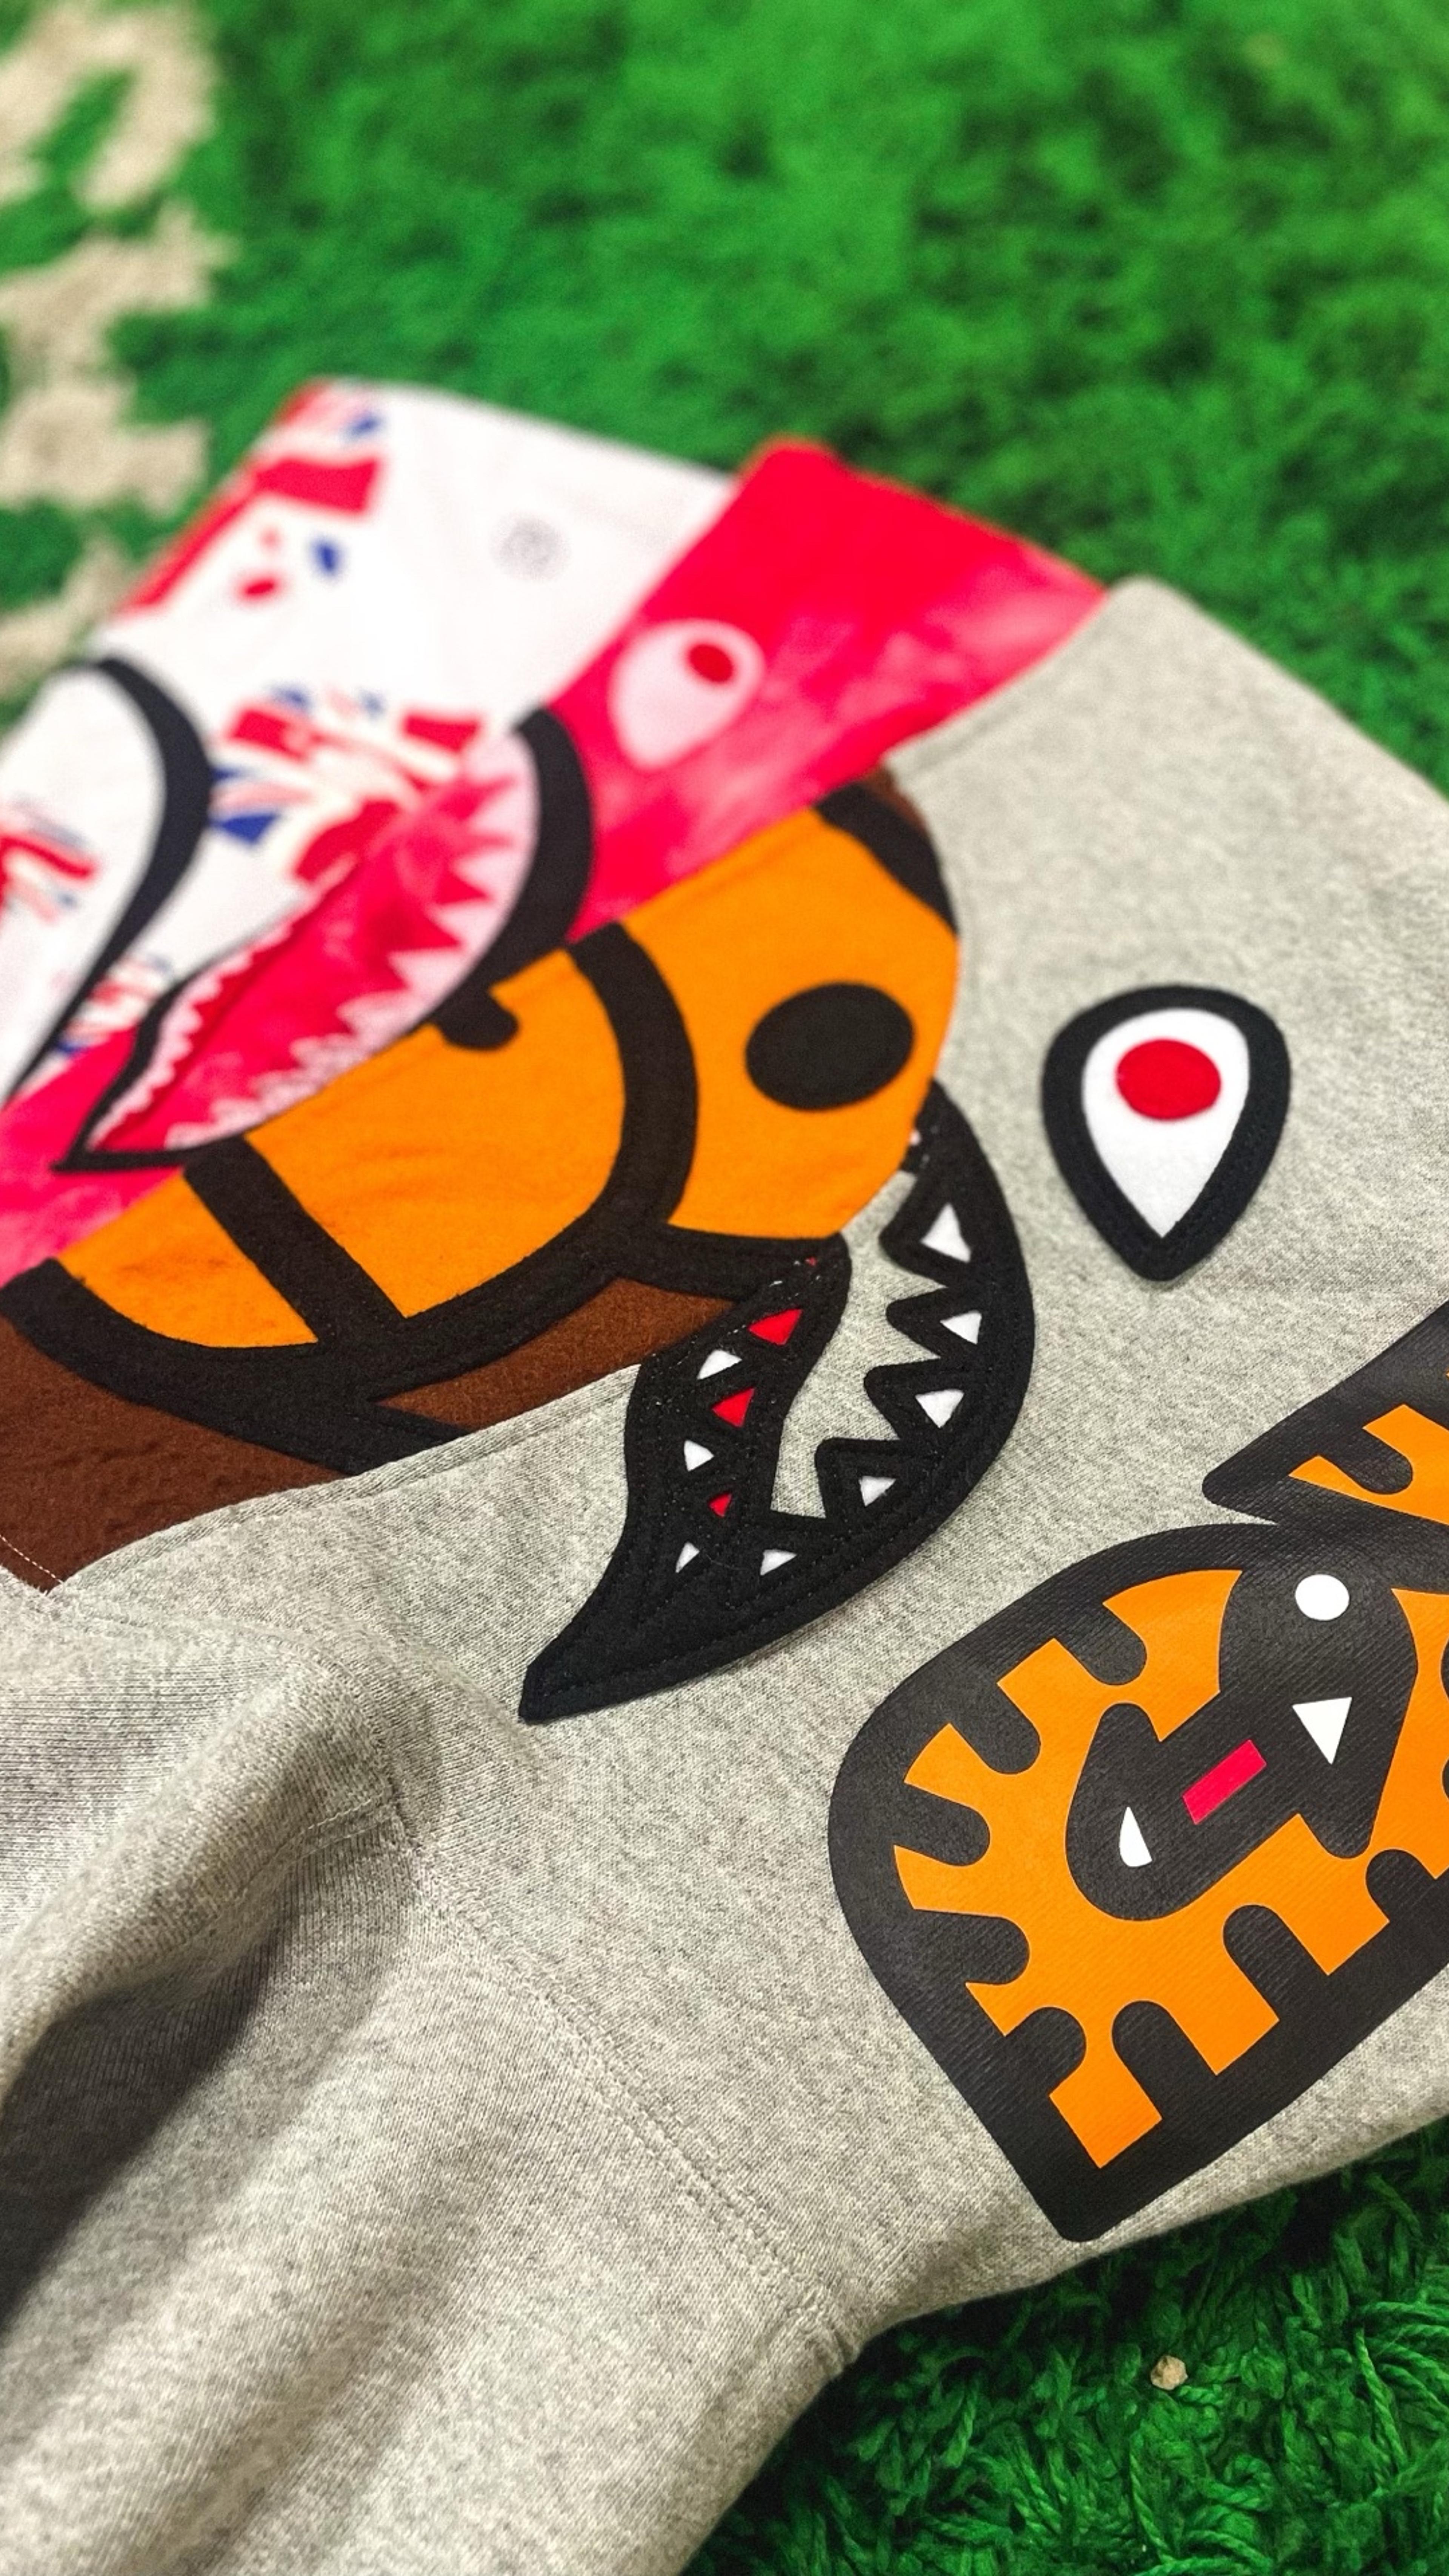 Preview image for the show titled "Bape Go Crazy 🐼 " at Today @ 8:00 PM